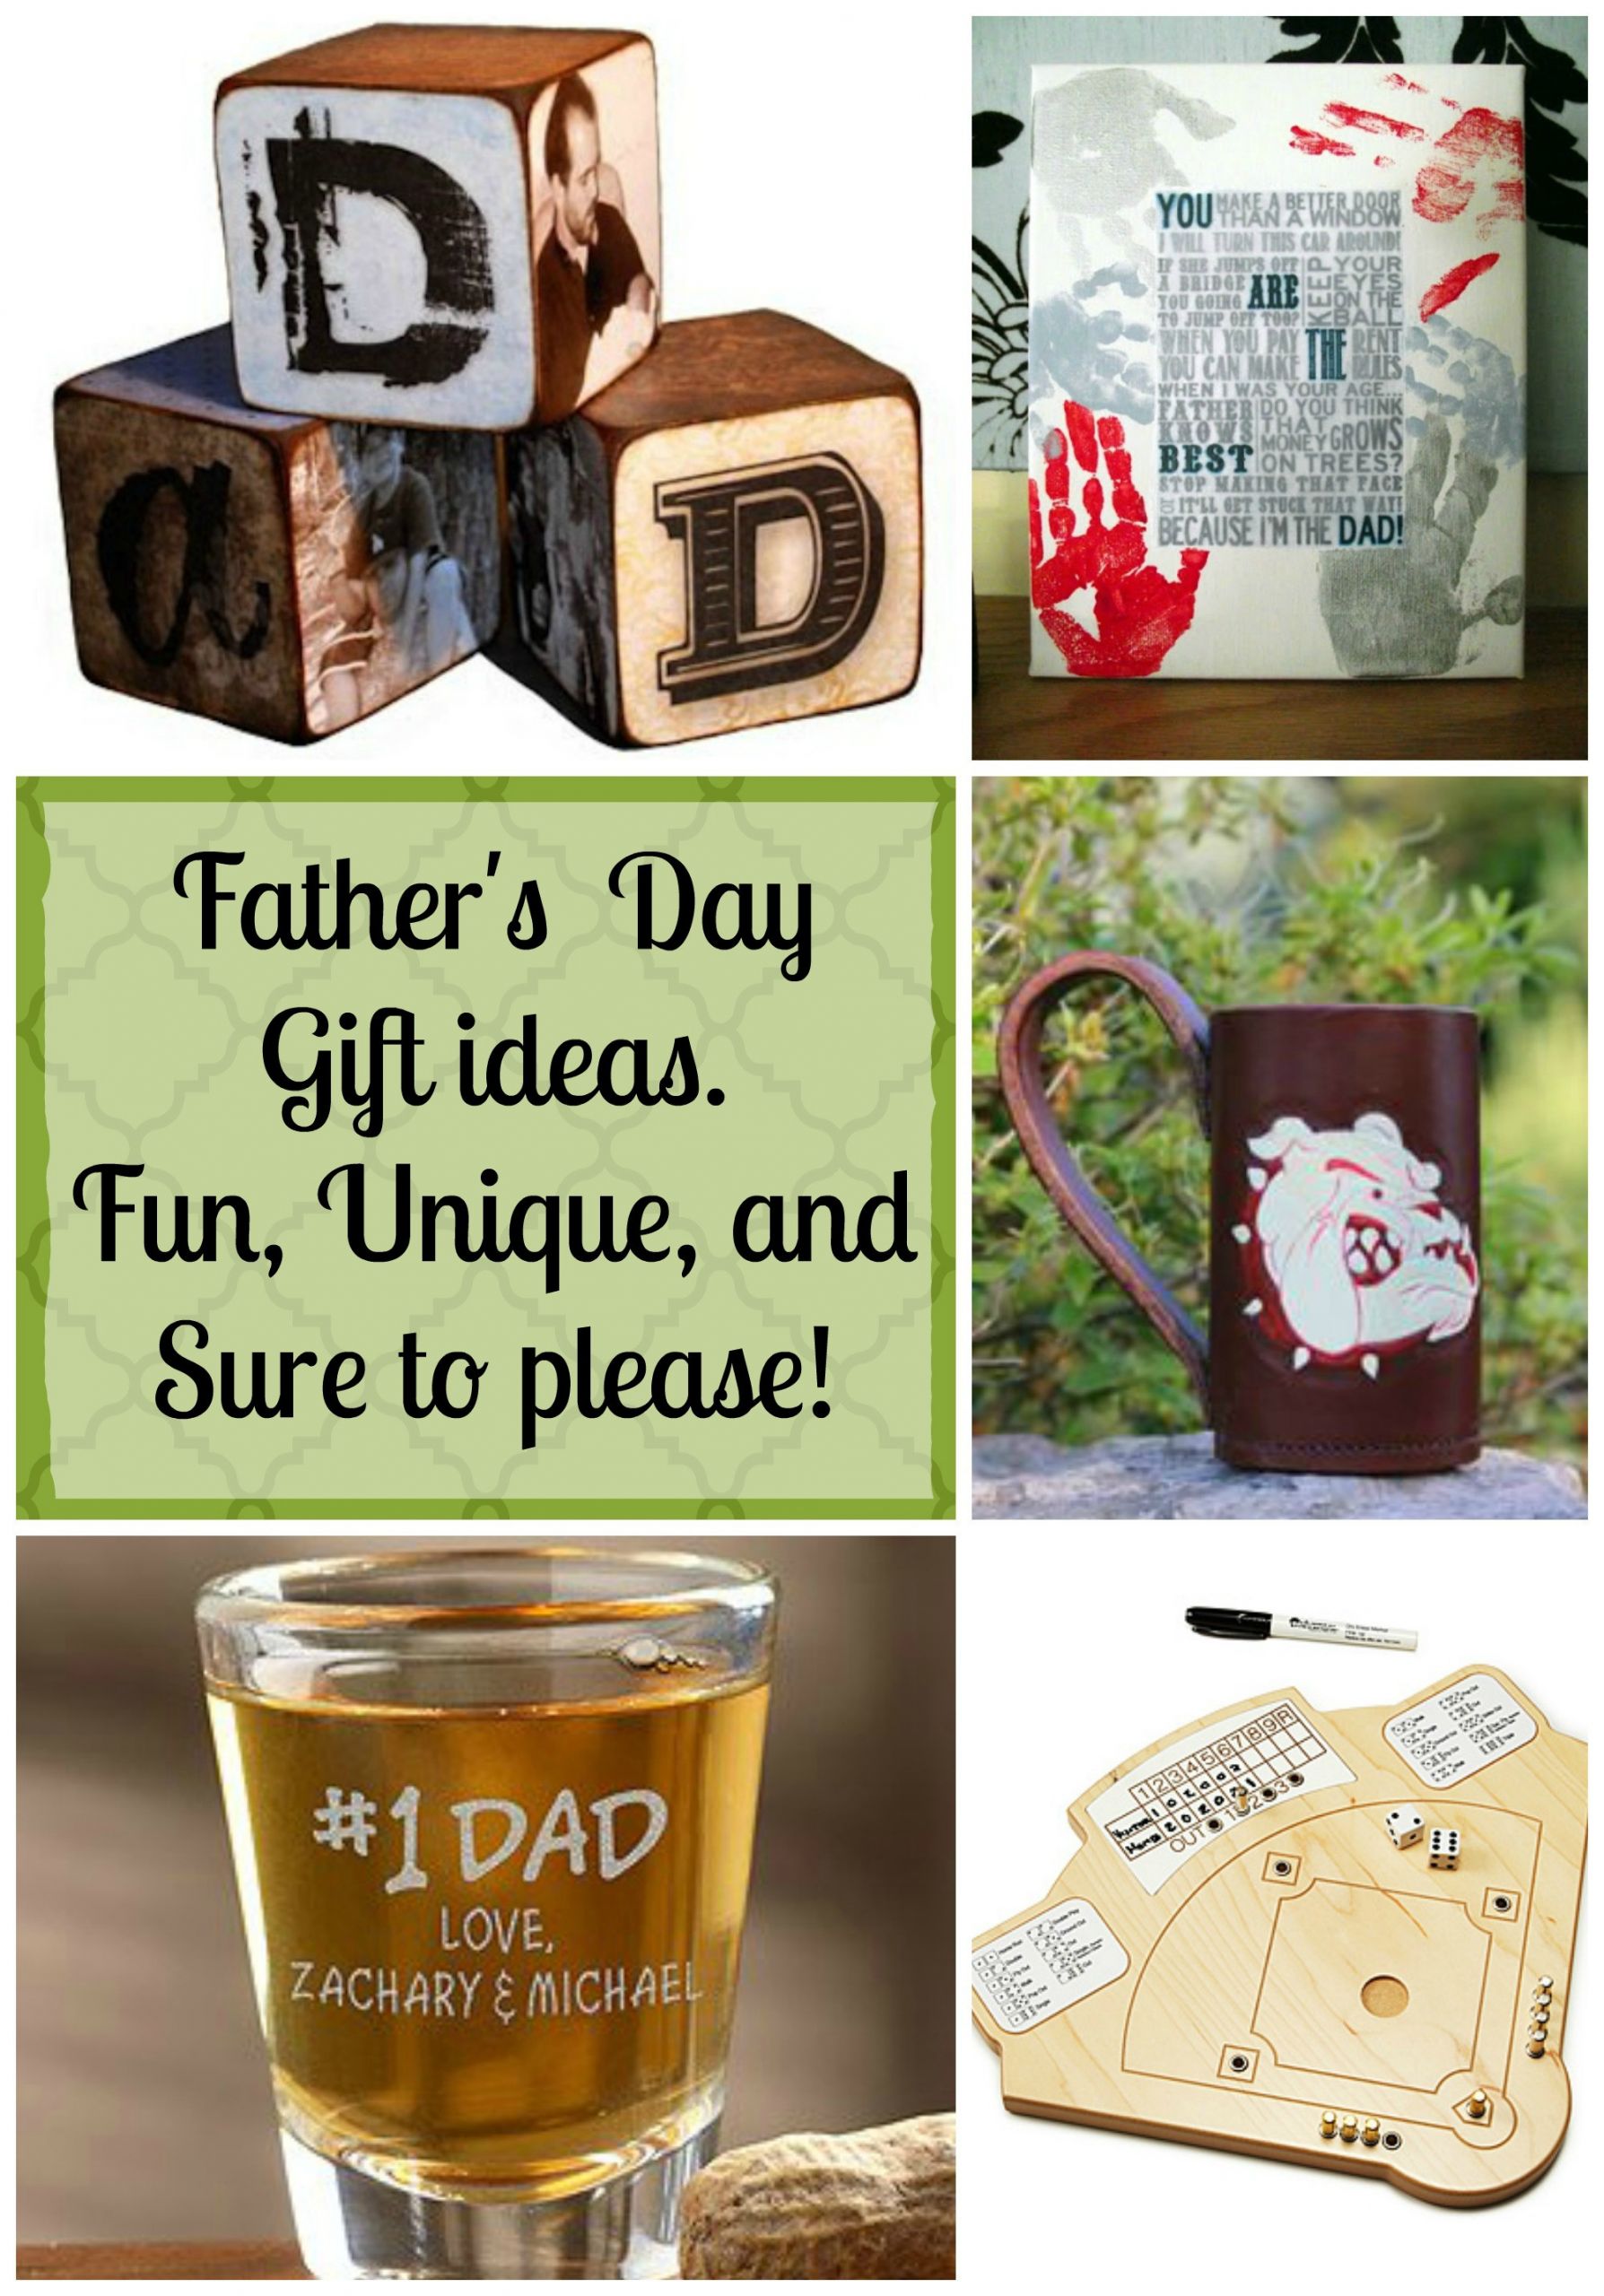 Fathersday Gift Ideas
 15 Great Father s Day Gift Ideas A Proverbs 31 Wife